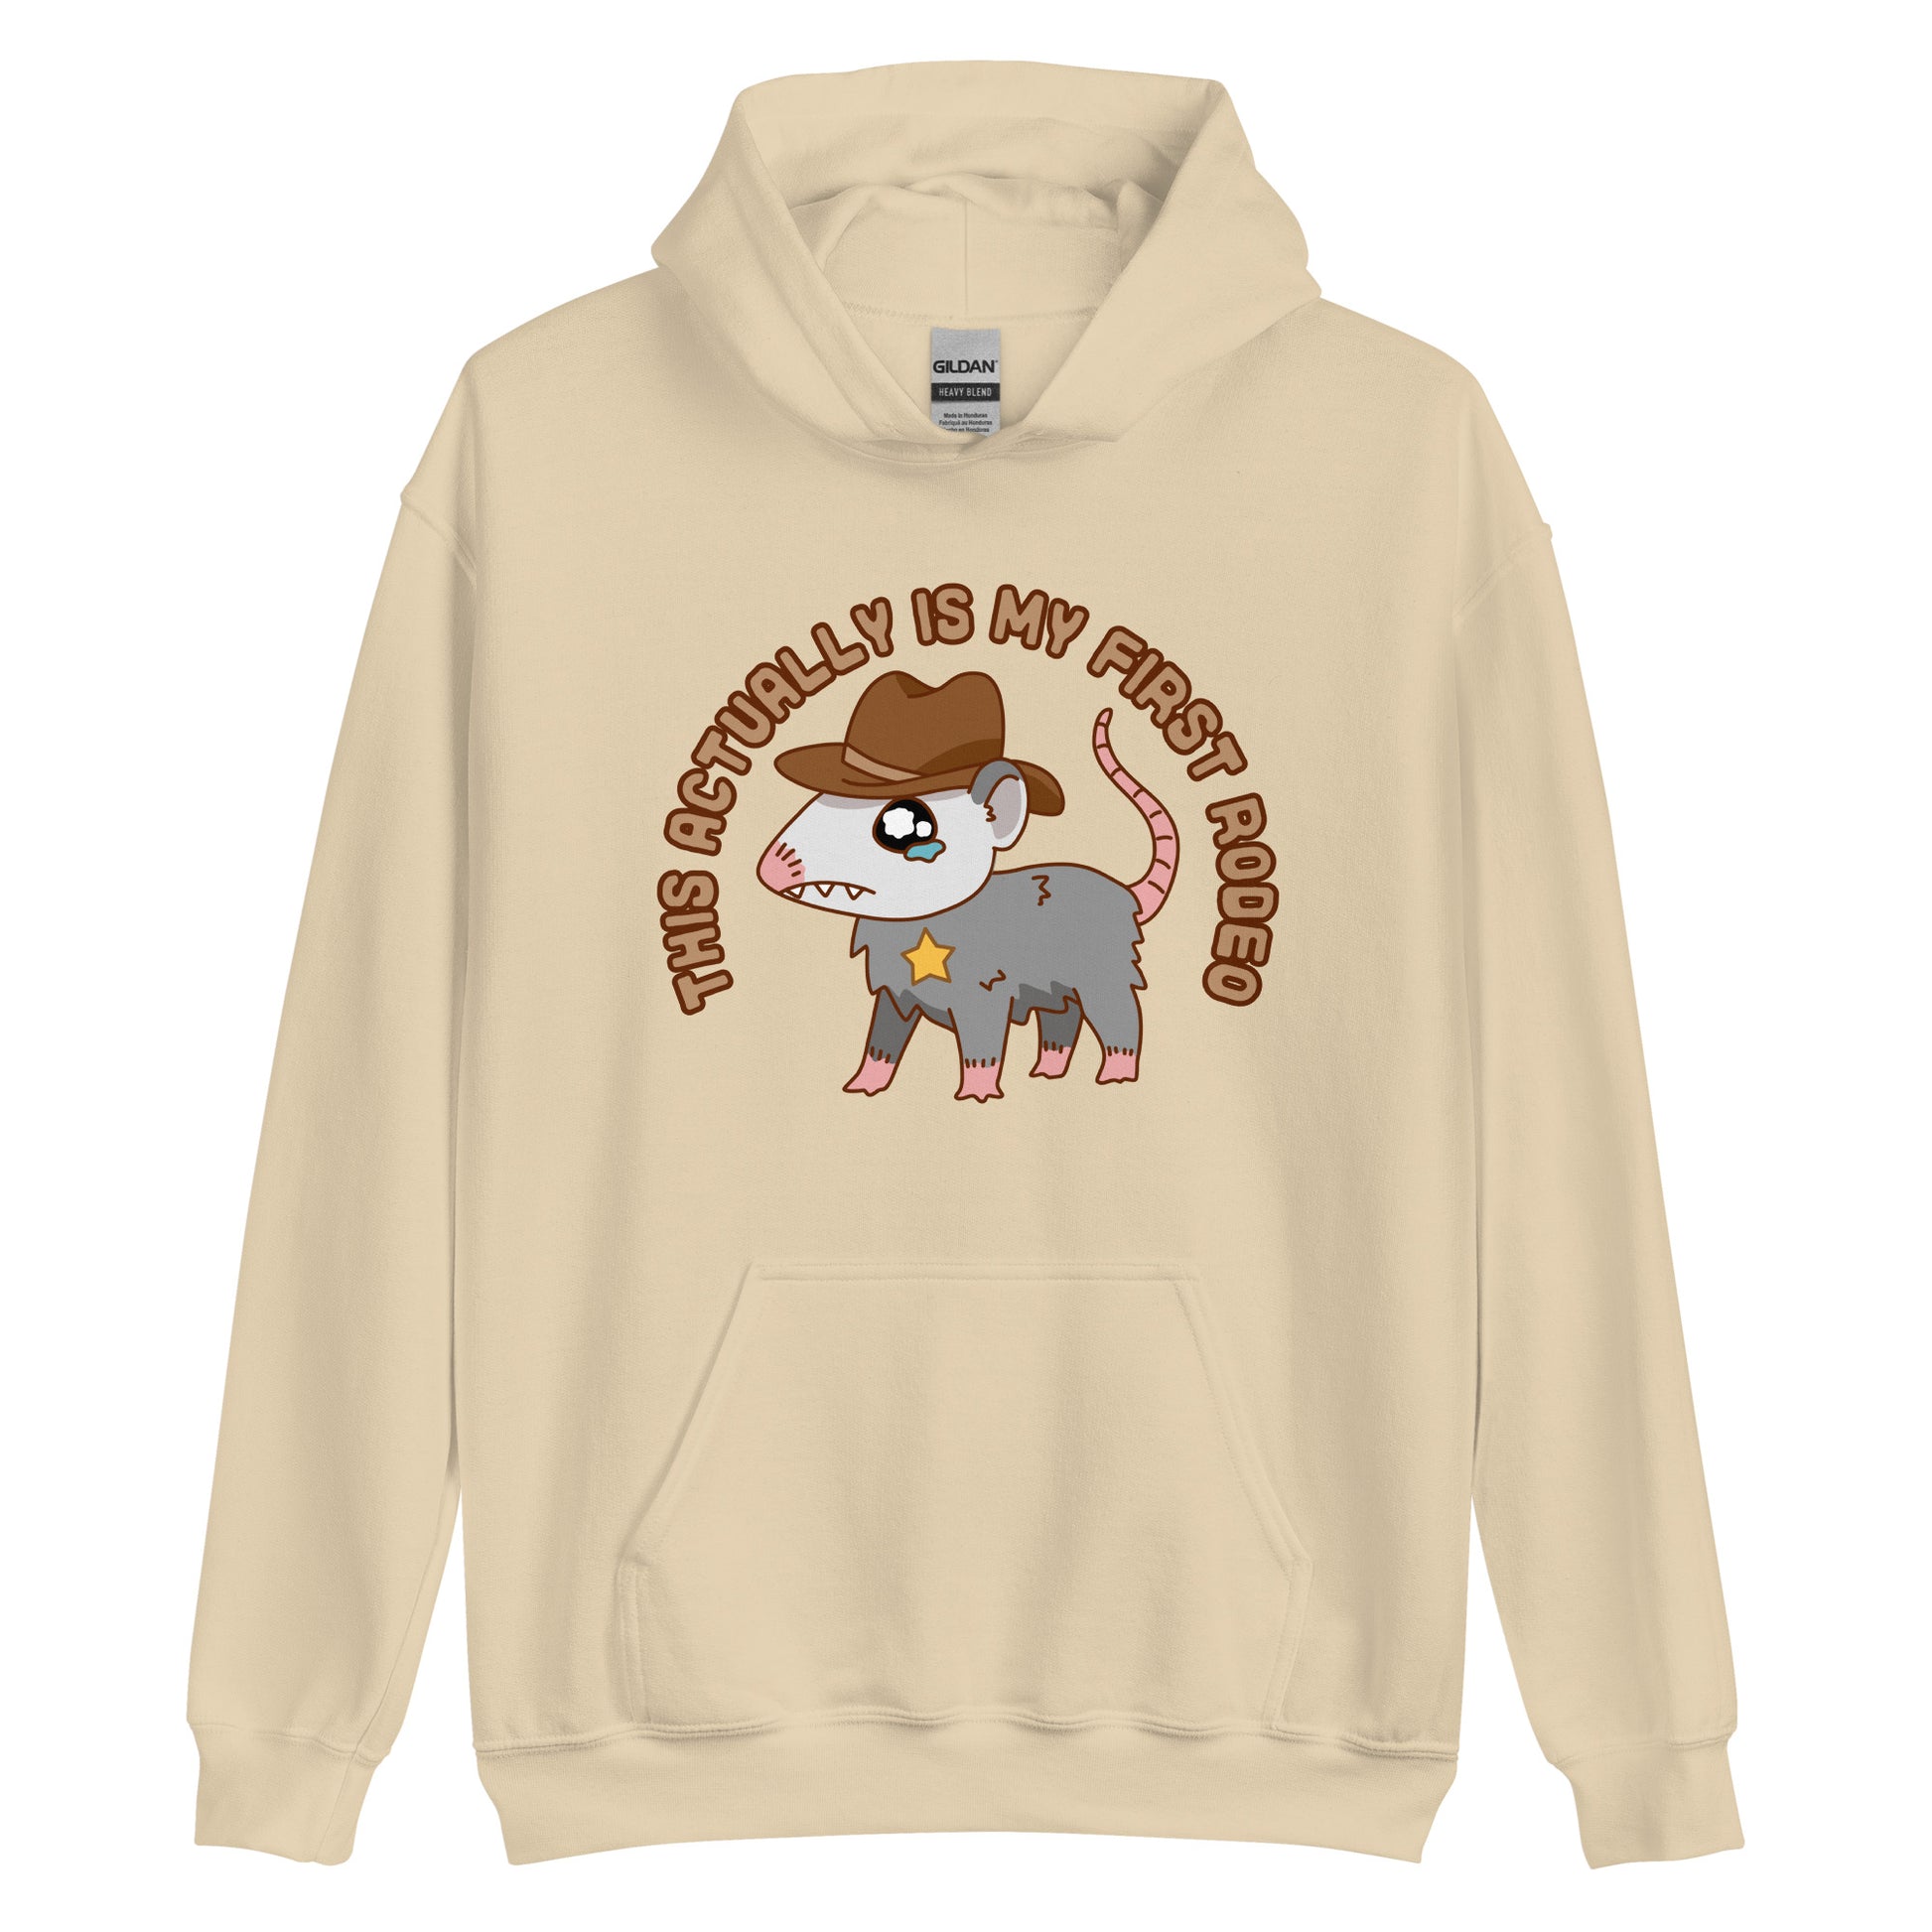 A tan-colored hooded sweatshirt featuring an illustration of a cute and nervous possum wearing a cowboy hat and sherrif's star badge. Text above the possum in an arc reads "this actually is my first rodeo".